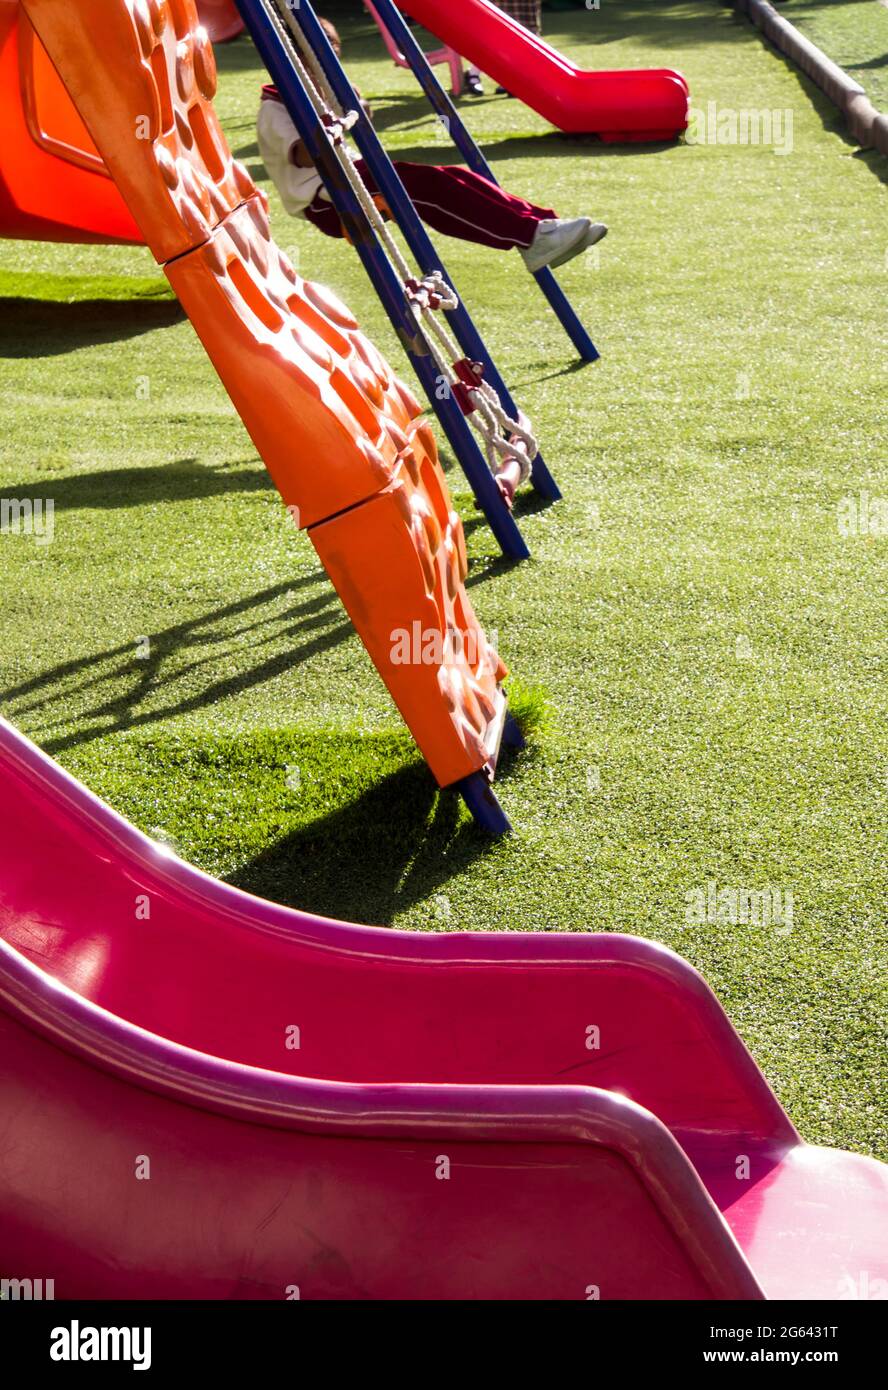 Children play with the toy in the schoolyard Stock Photo